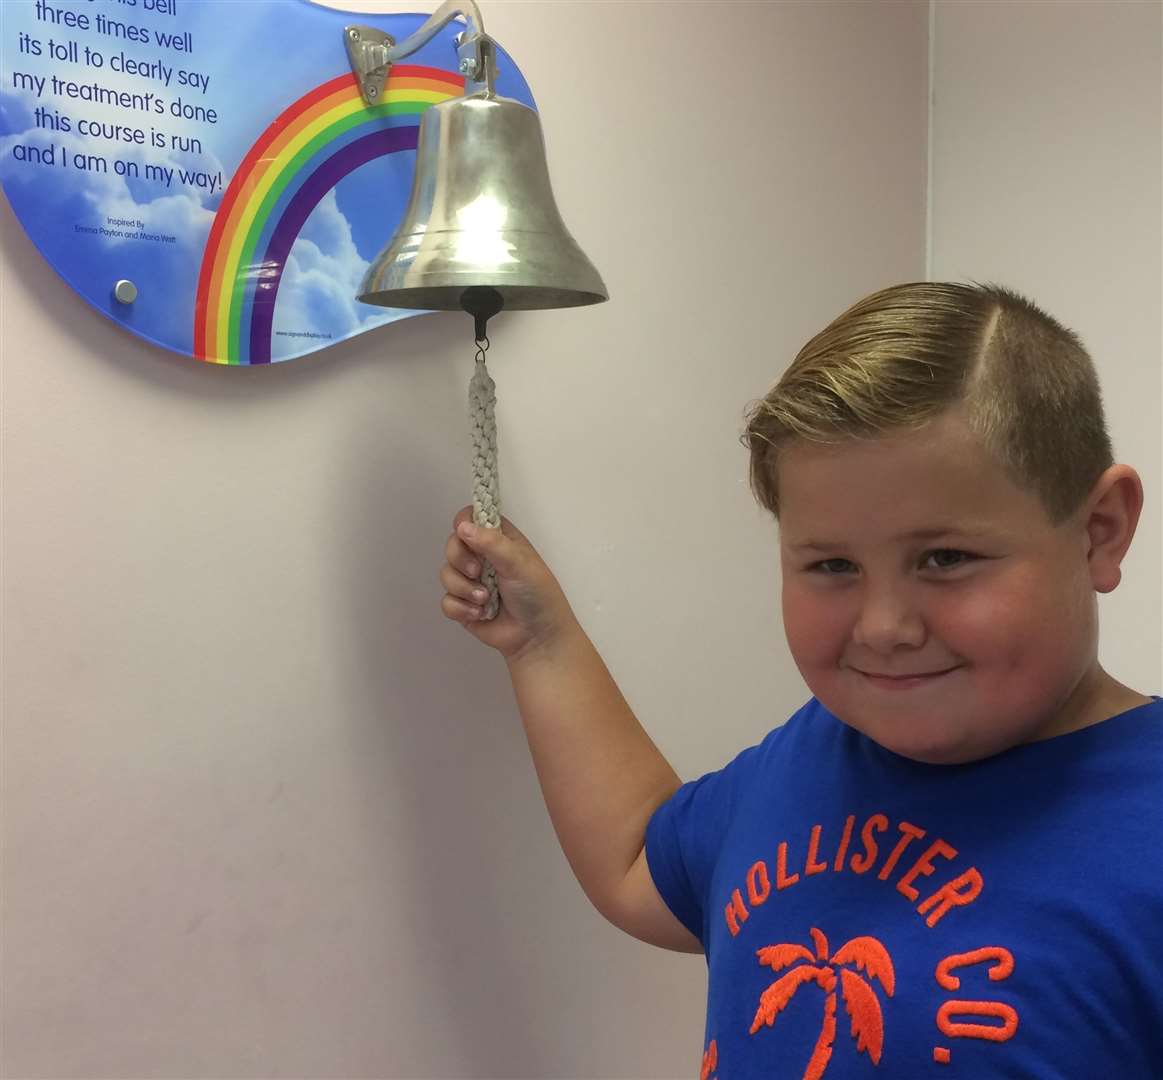 Aaron Lindridge, then aged eight, ringing the End of Treatment bell after five years free of cancer. He is pictured ringing the bell at the Royal Oak Children's Centre at the Royal Marsden in Surrey